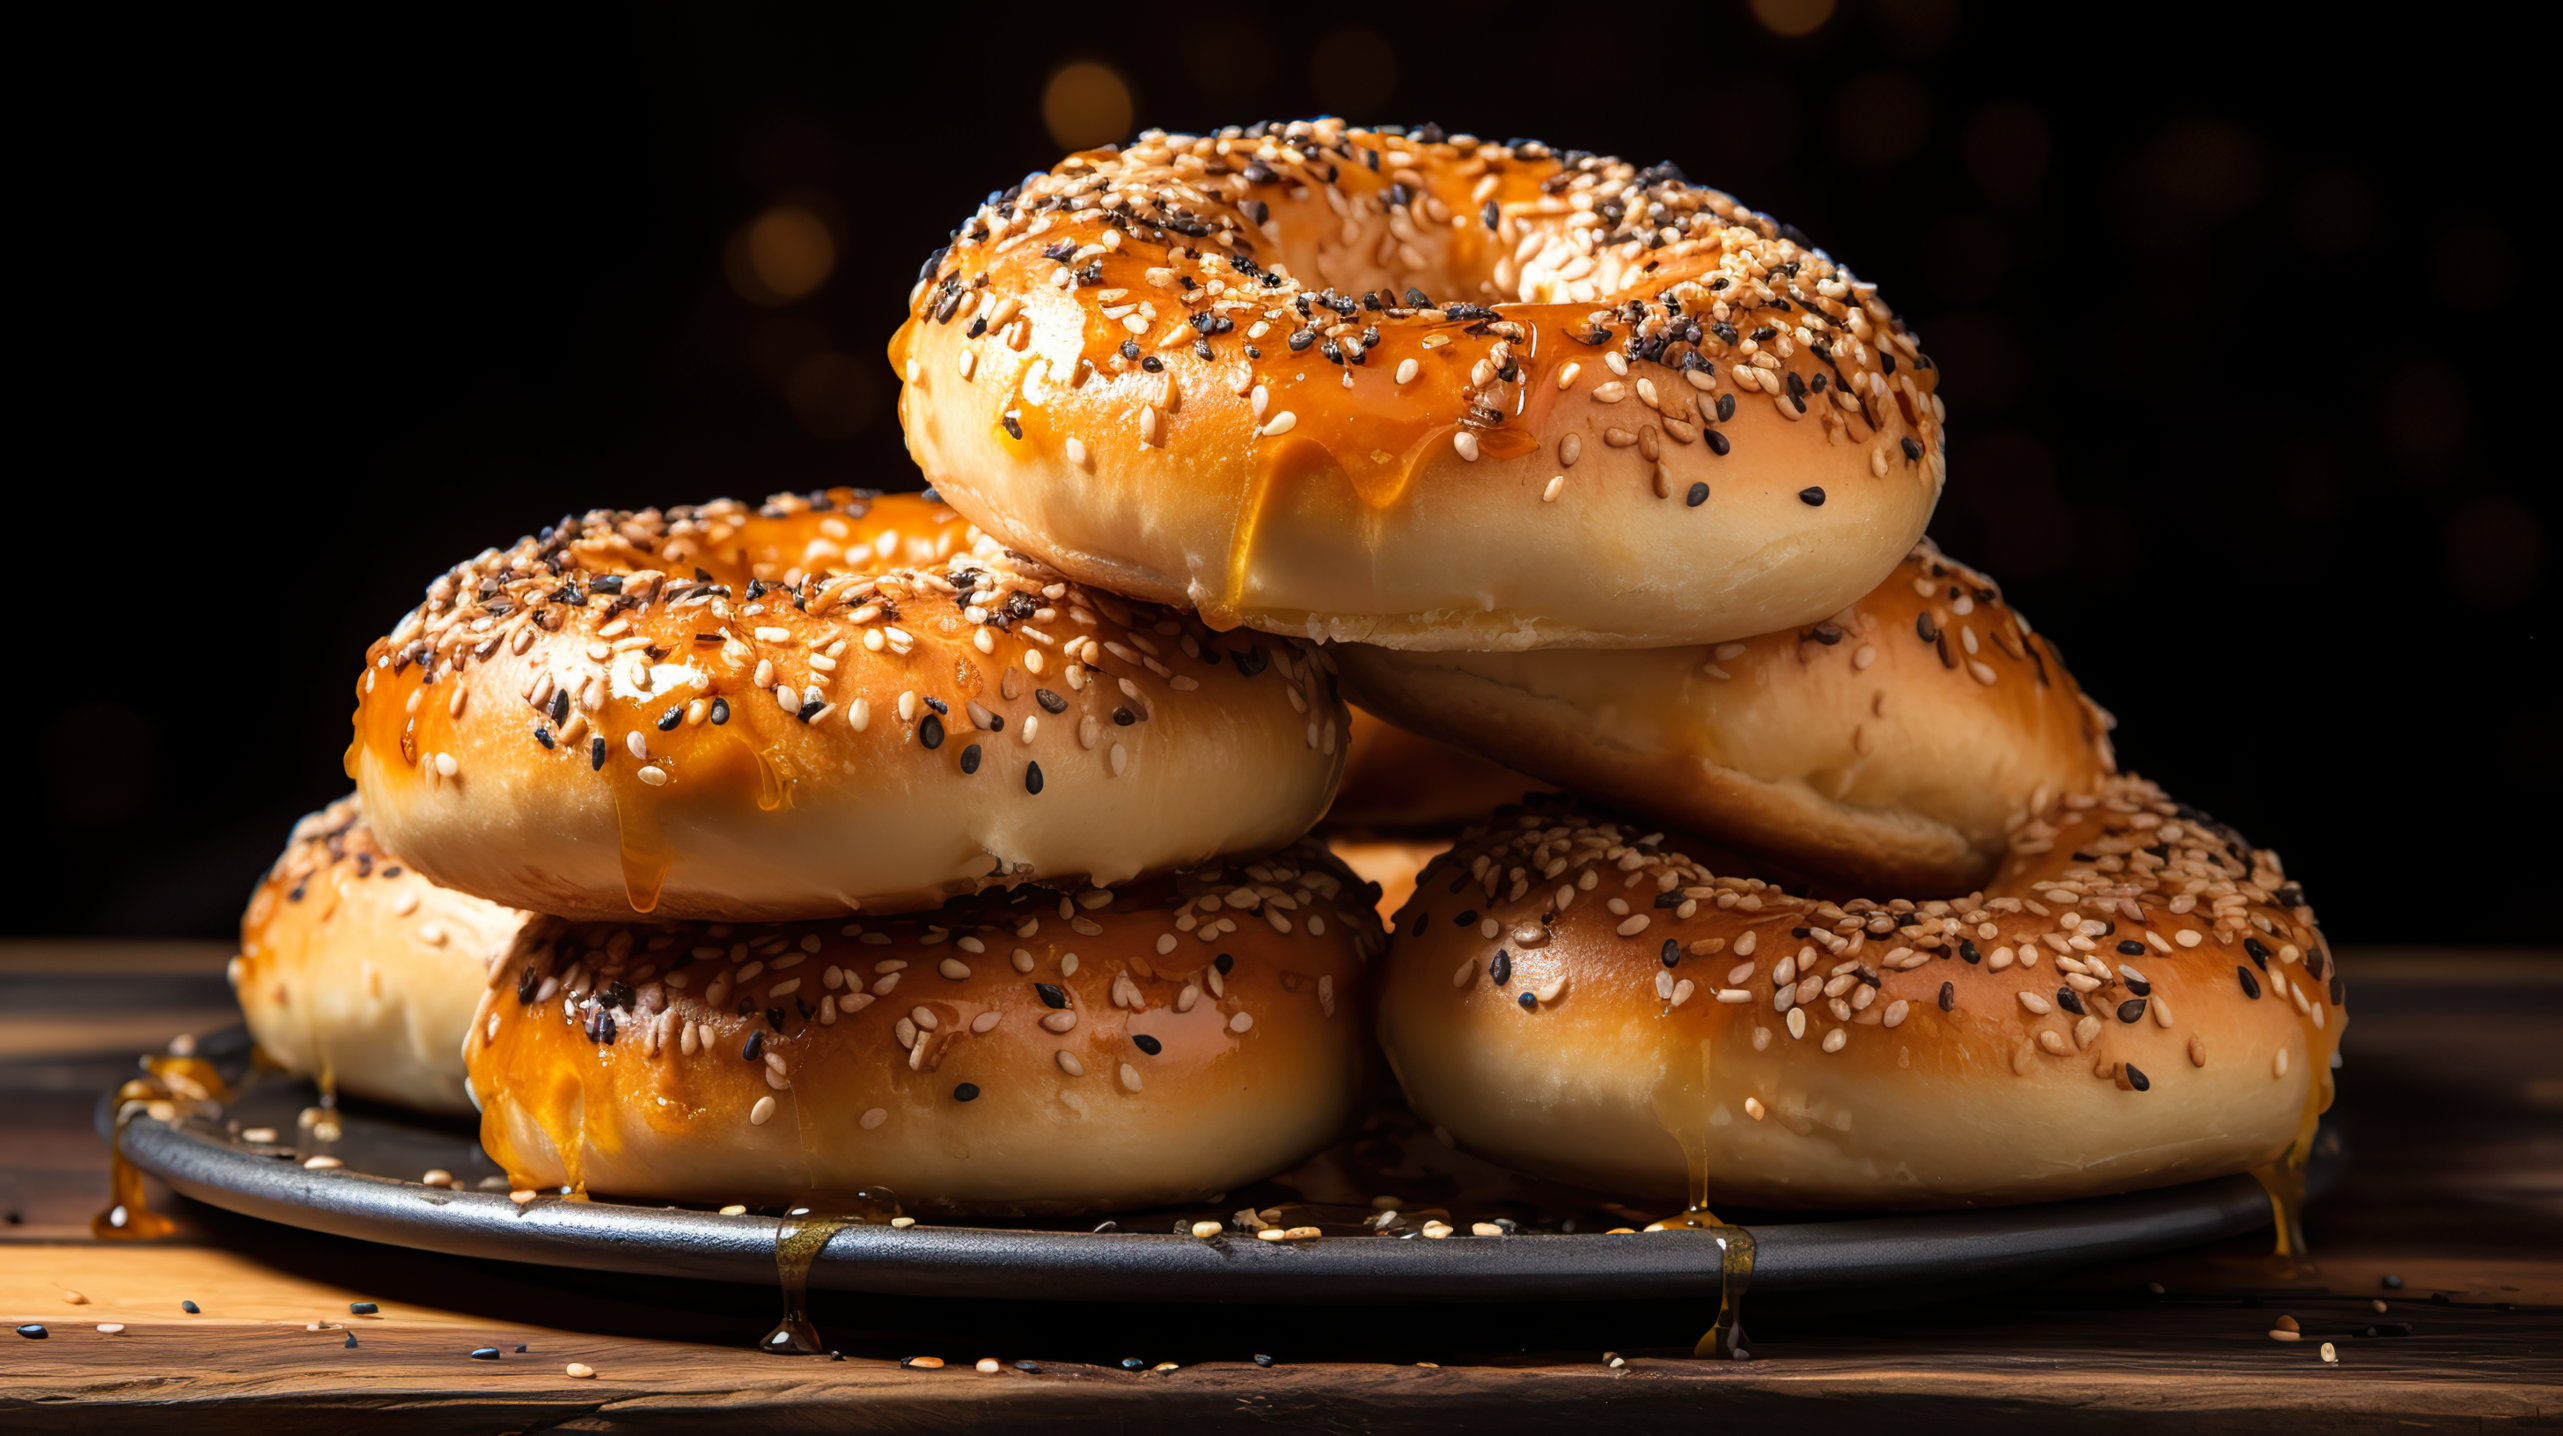 HD wallpaper of freshly baked sesame seed bagels on a plate with a dark, bokeh background.